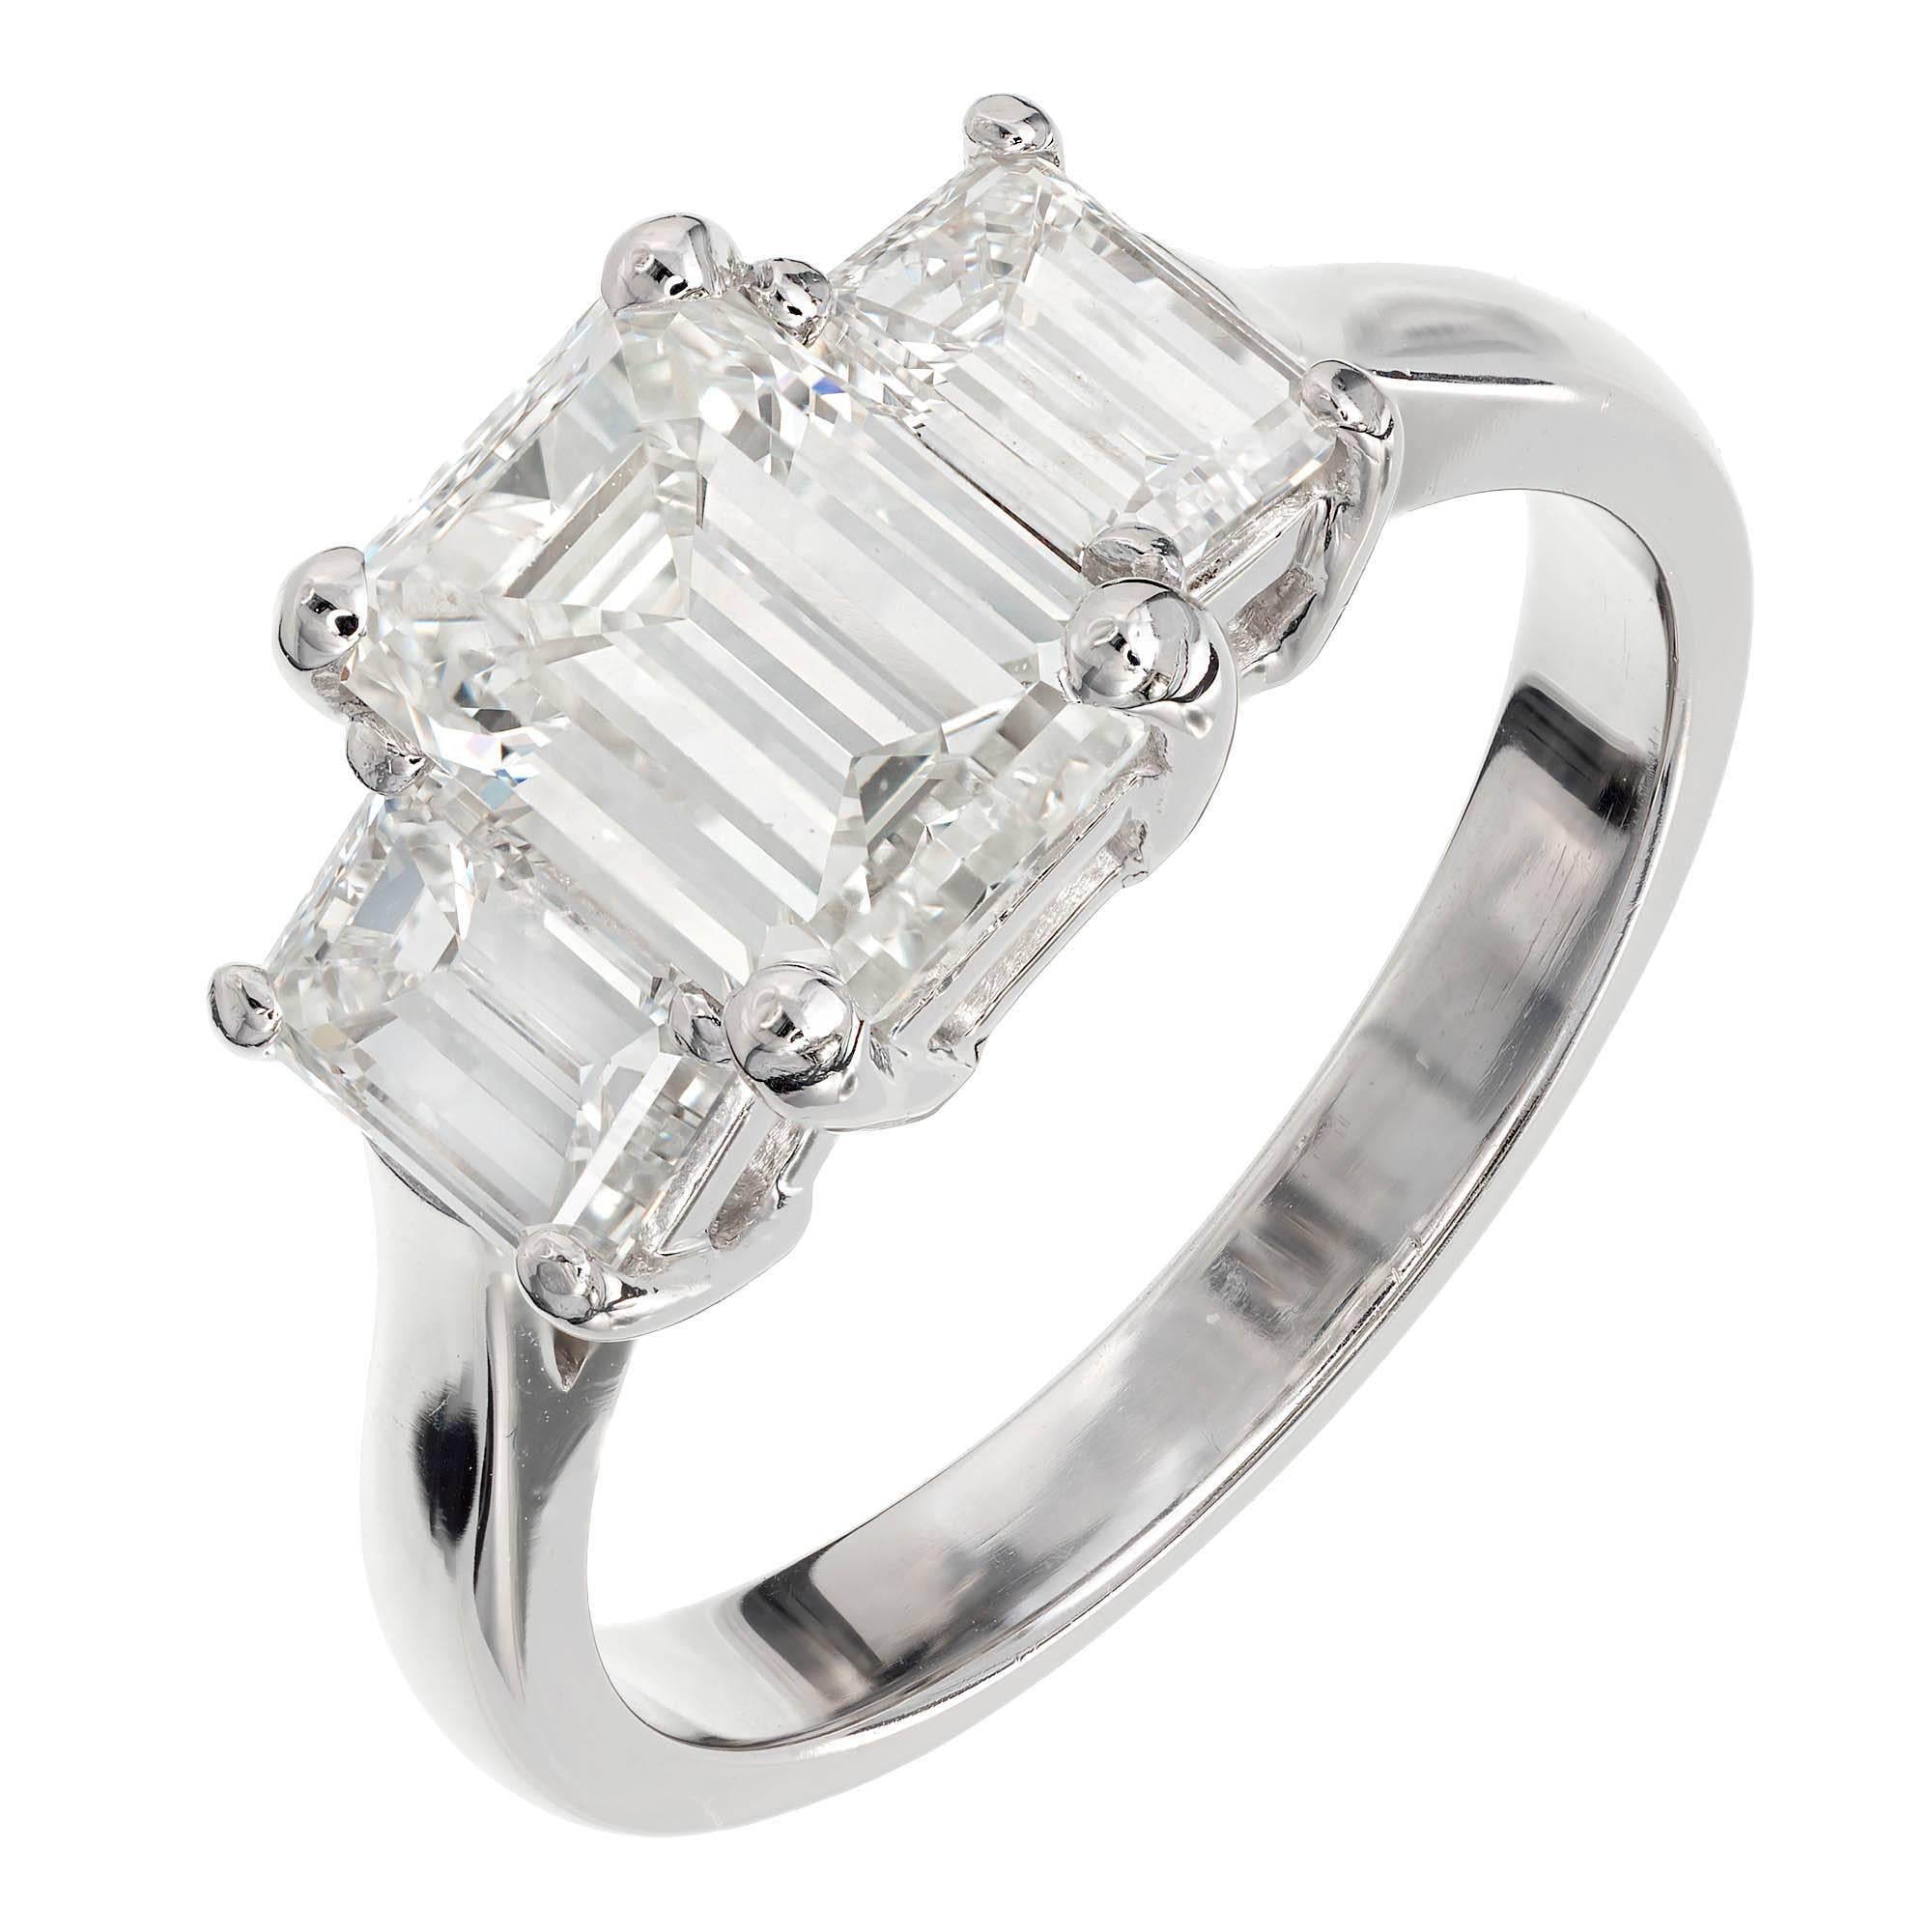 Peter Suchy three-stone handmade platinum diamond engagement ring. Set low to the finger for comfort and designed to fit a wedding band close to the base of the ring. All three diamonds are step cut emerald cut with lots of sparkle and personality